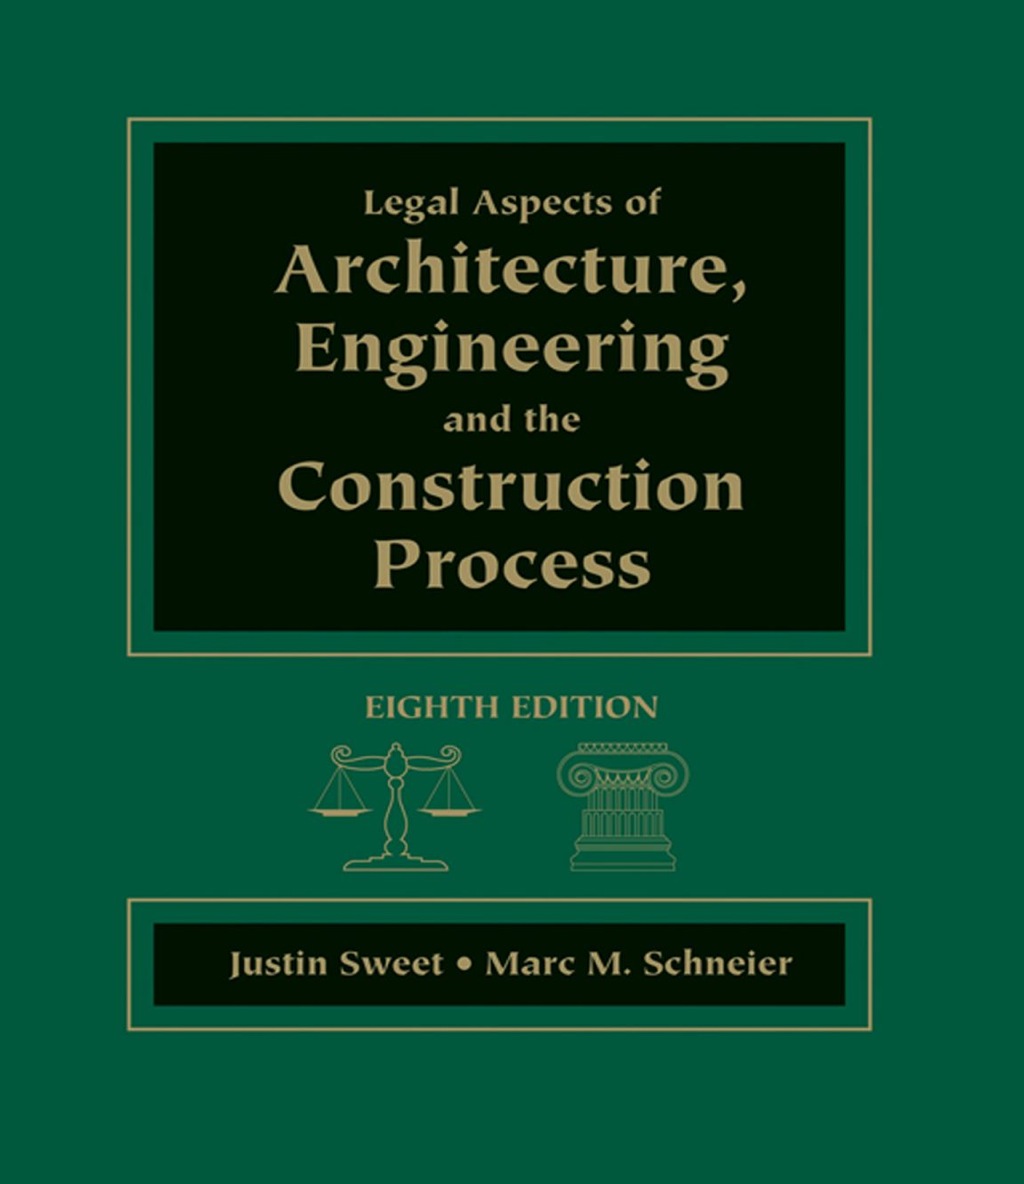 Legal Aspects of Architecture  Engineering & the Construction Process - 8th Edition (eBook Rental)